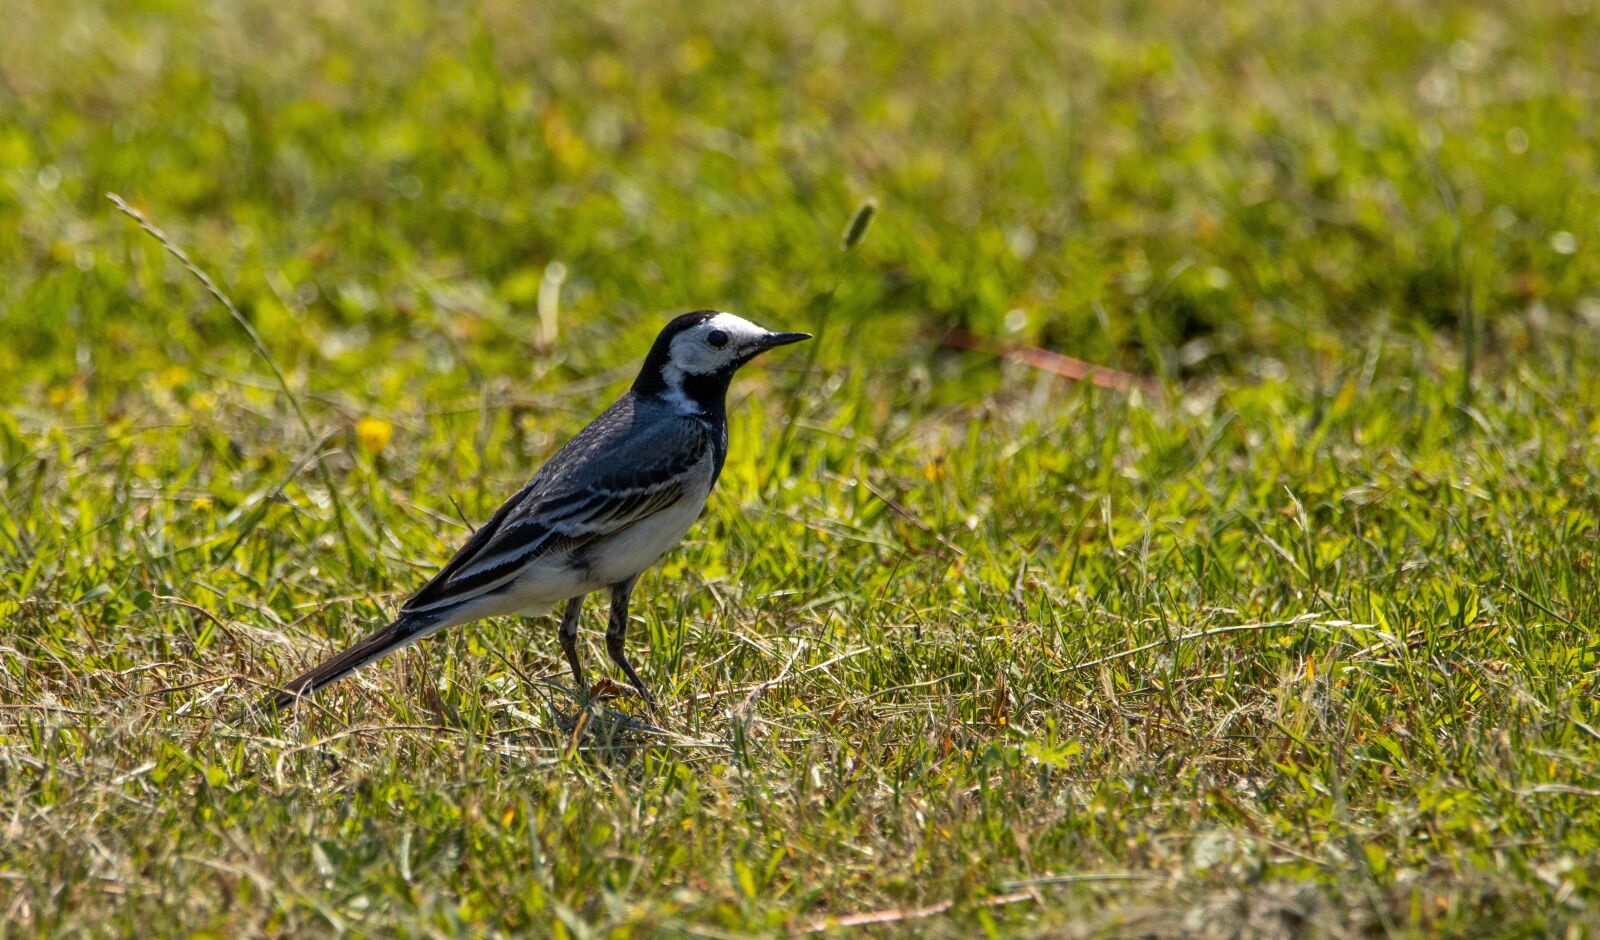 150-600mm F5-6.3 DG OS HSM | Contemporary 015 sample photo. White wagtail, grass, nature photography